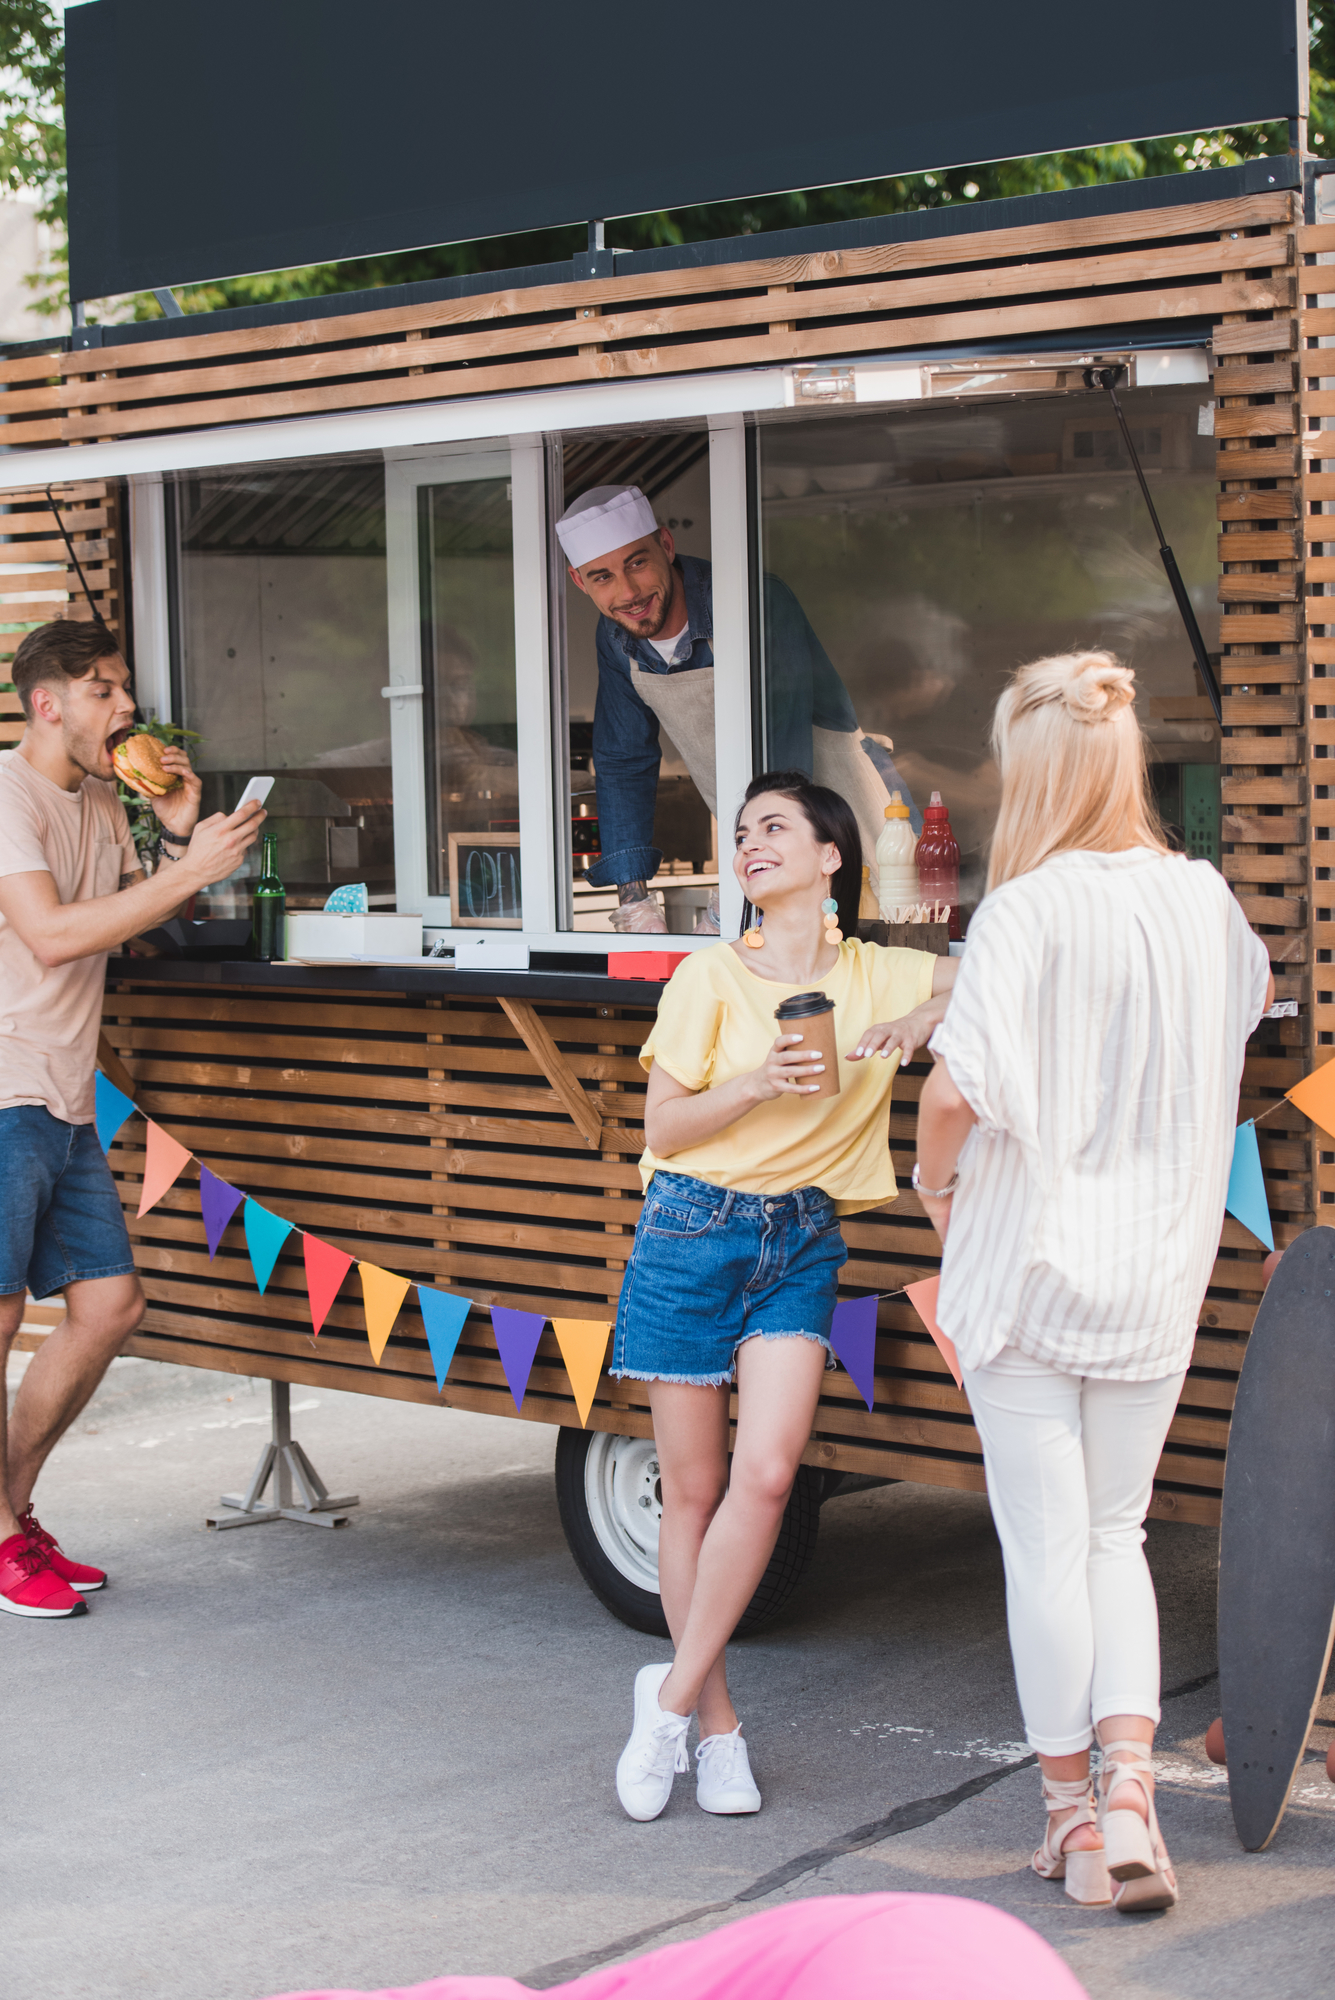 The Top 3 Food Trucks Trends You Need to Know About Shanghai Mobile